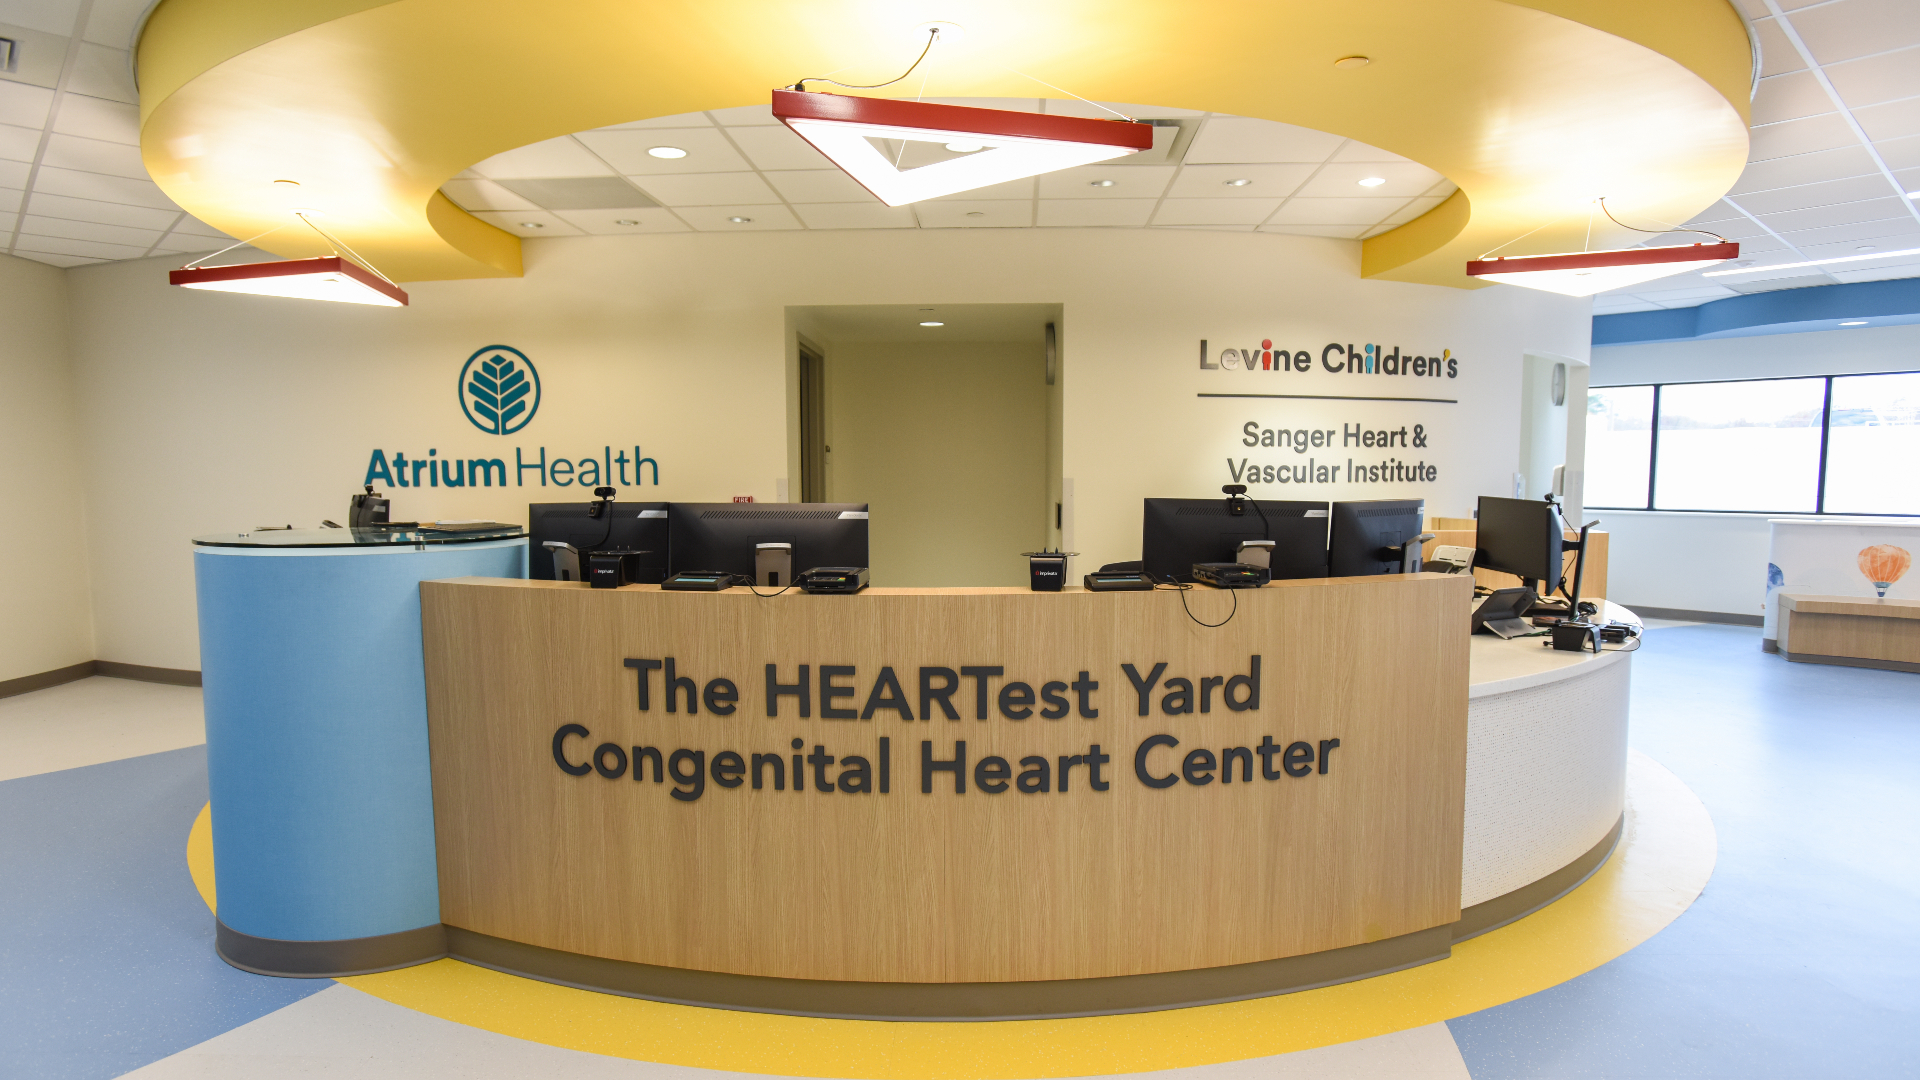 Atrium Health Levine Children’s announces the grand opening of a next-generation pediatric cardiovascular and congenital heart outpatient clinic – The HEARTest Yard Congenital Heart Center at Levine Children’s – to support enhanced treatment and resources for pediatric patients with congenital heart disease and provide them with comprehensive cardiac care to help reach their fullest potential.